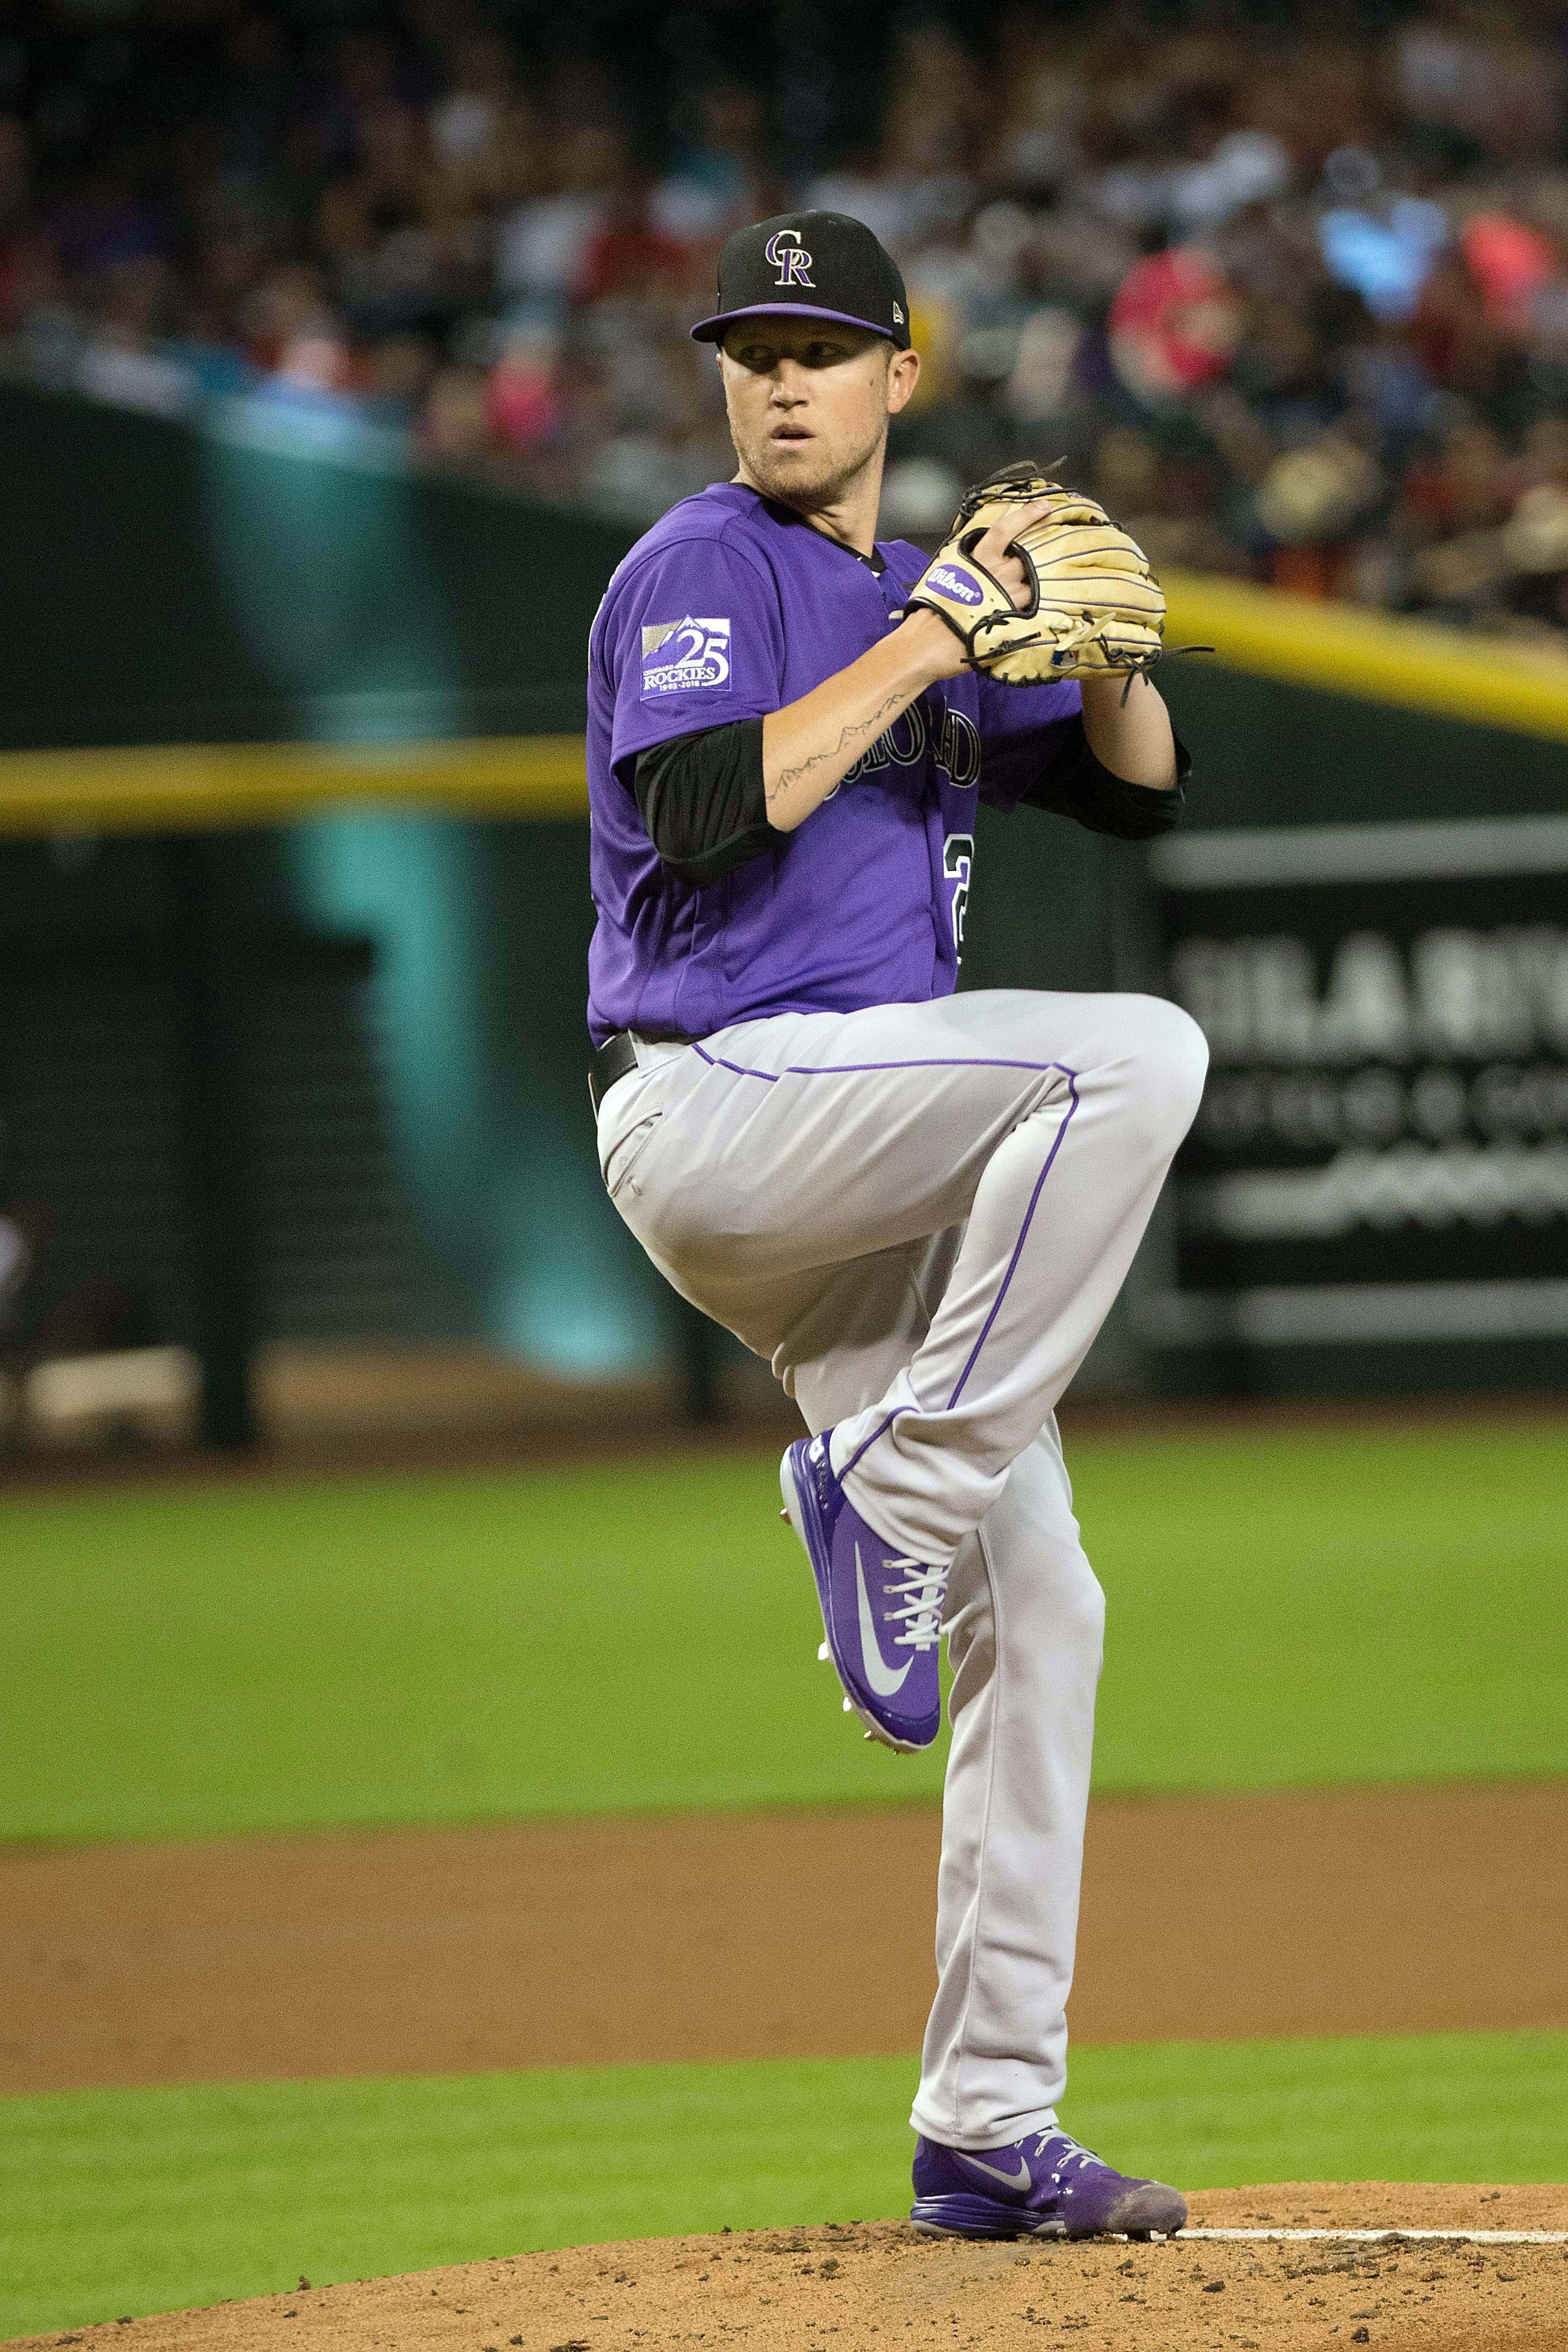 The mystery of Coors Field and Kyle Freeland's dominance